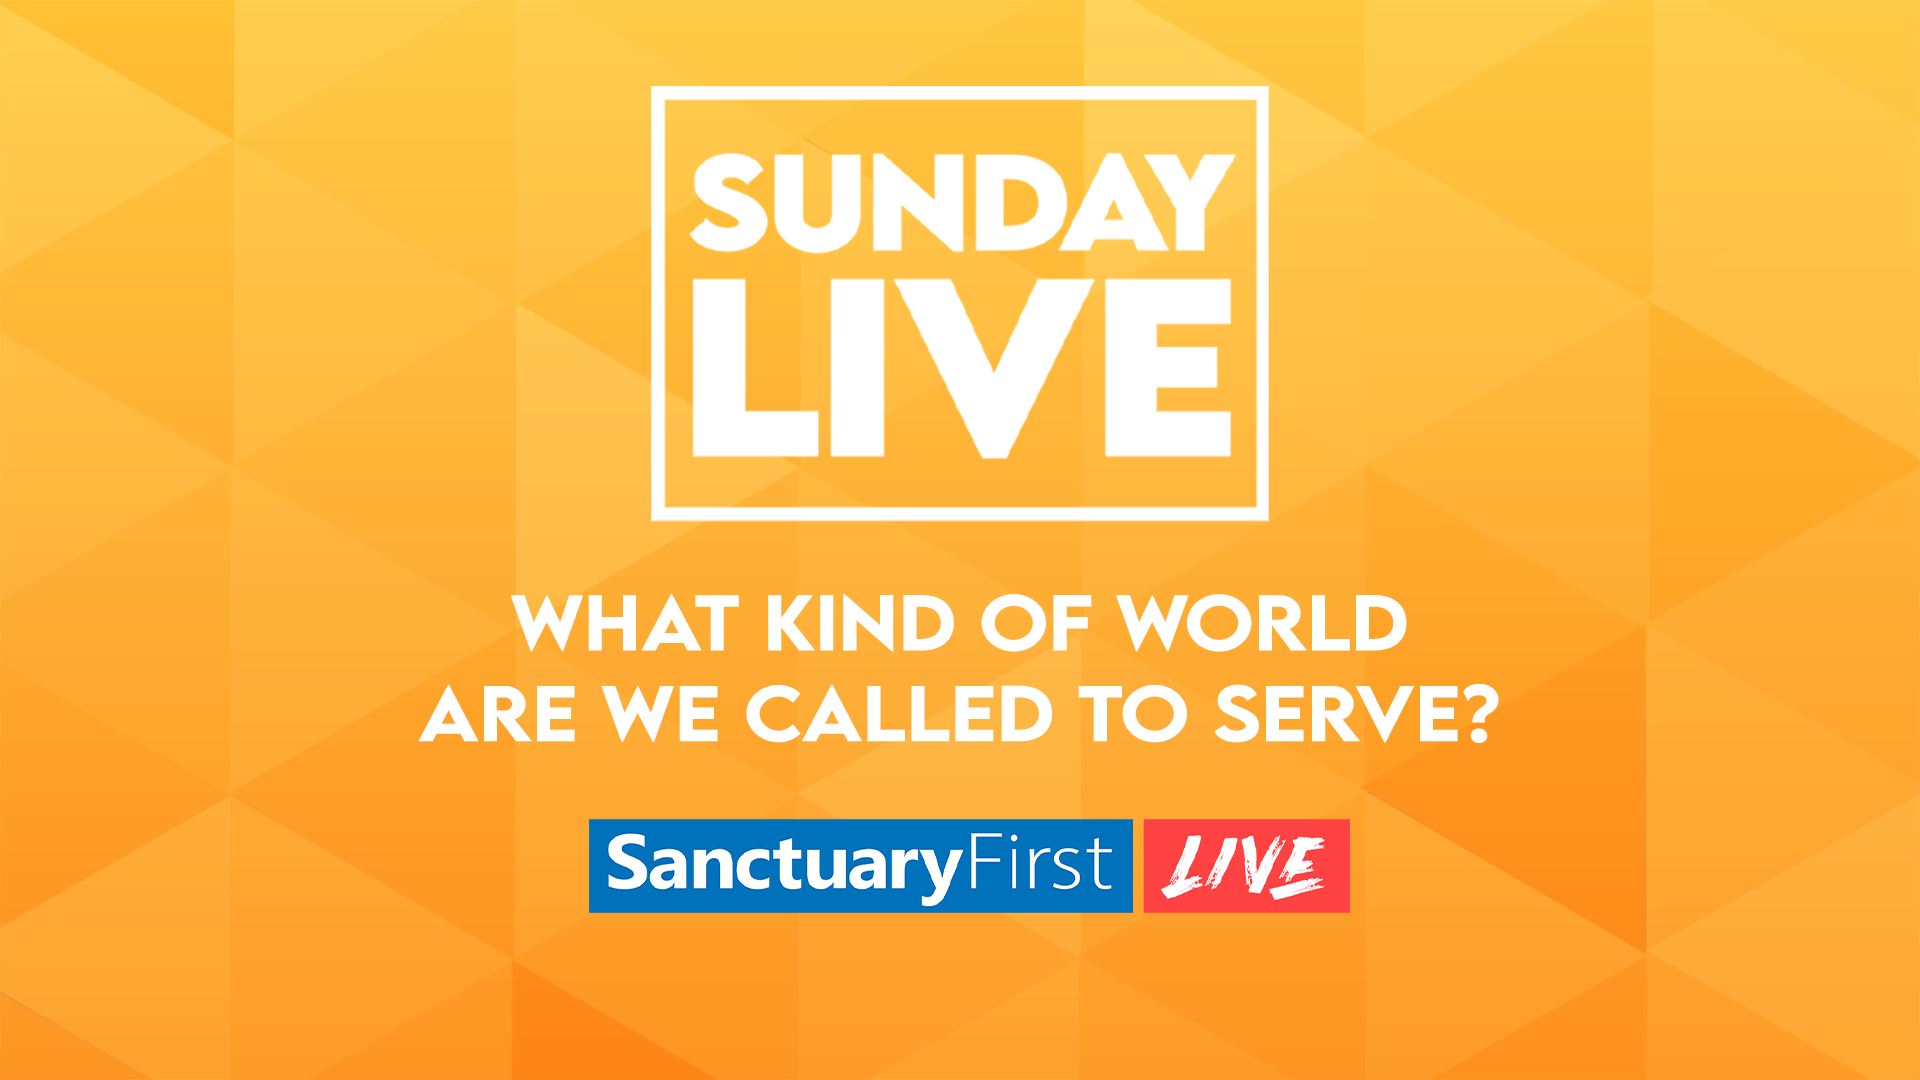 Sunday Live - What Kind of World Are We Called To Serve